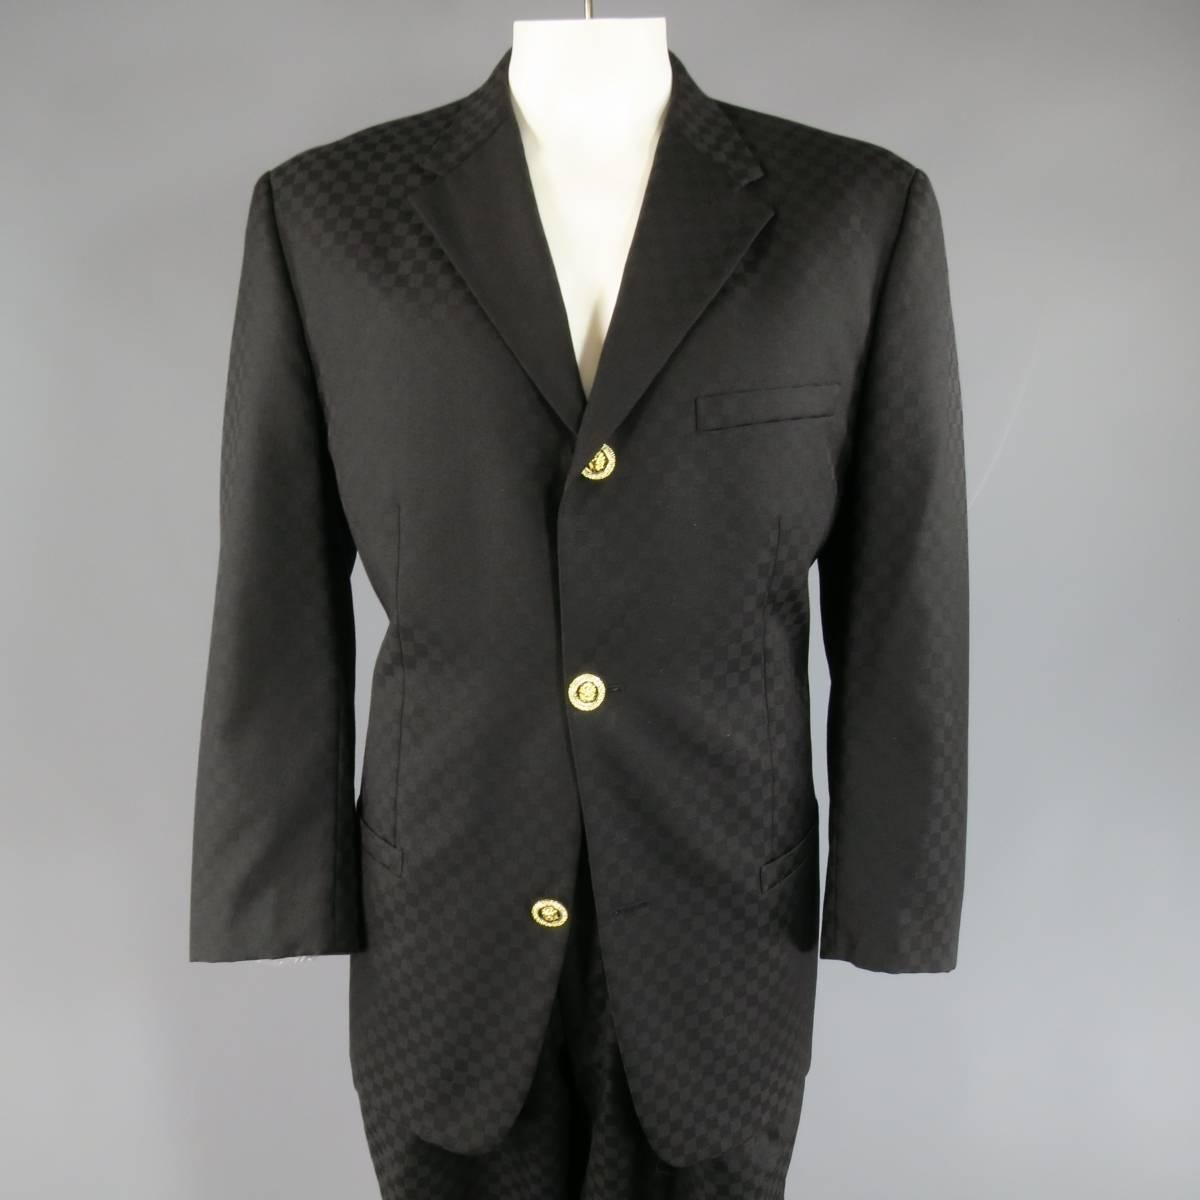 Vintage GIANNI VERSACE suit in black on black checkered wool includes a three button, notch lapel sport coat with gold & black enamel. rhinestone studded lion head buttons and matching pleated trouser with cuffed hem. Made in Italy.
 
Excellent